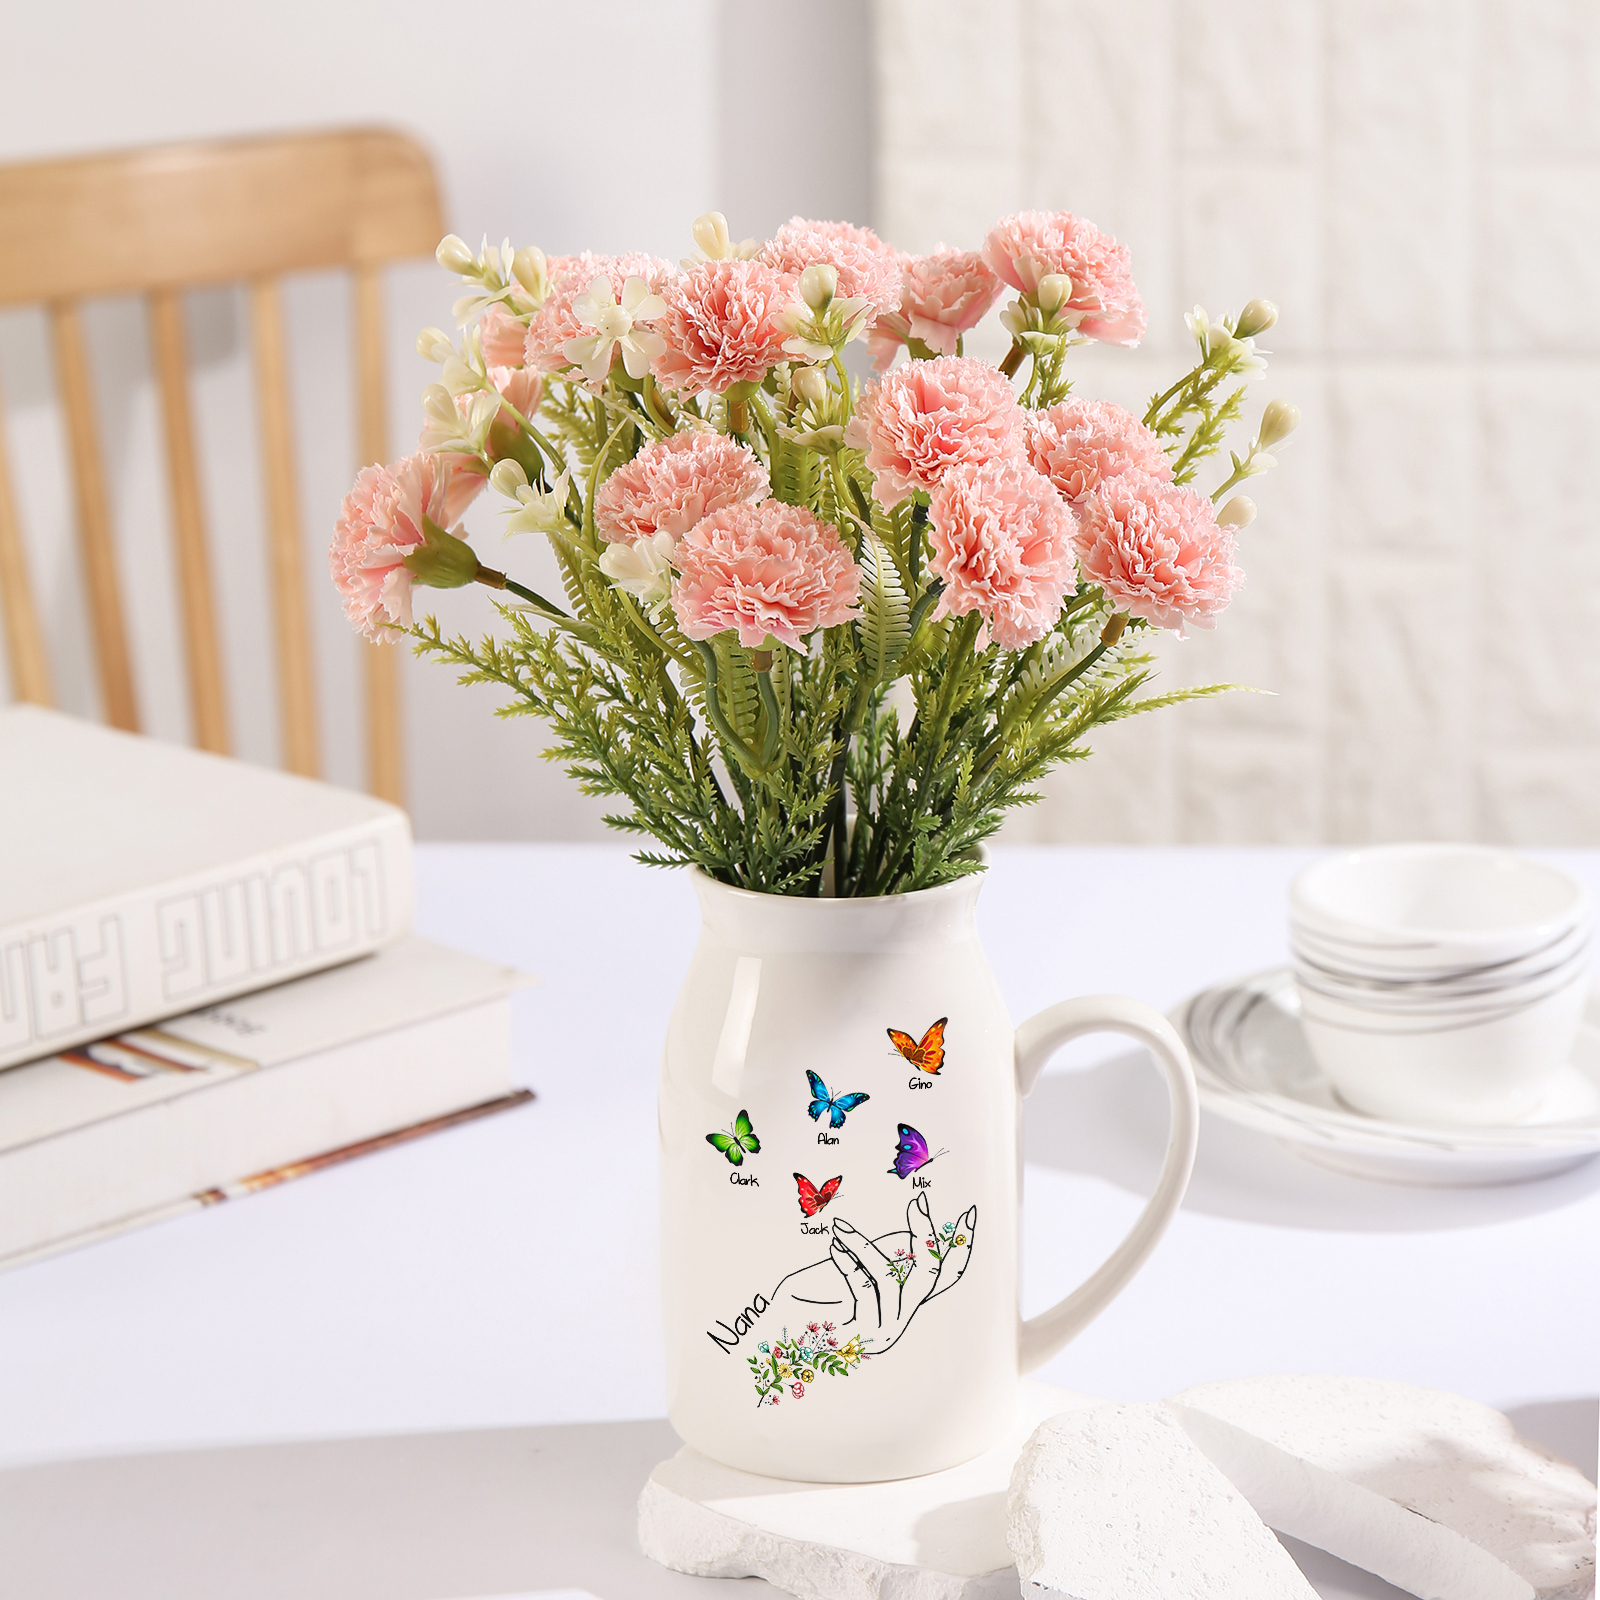 5 Names - Personalized Exquisite Flower Hand Butterfly Style Ceramic Cup With Customizable Names As a Special Gift For Nana/Mom